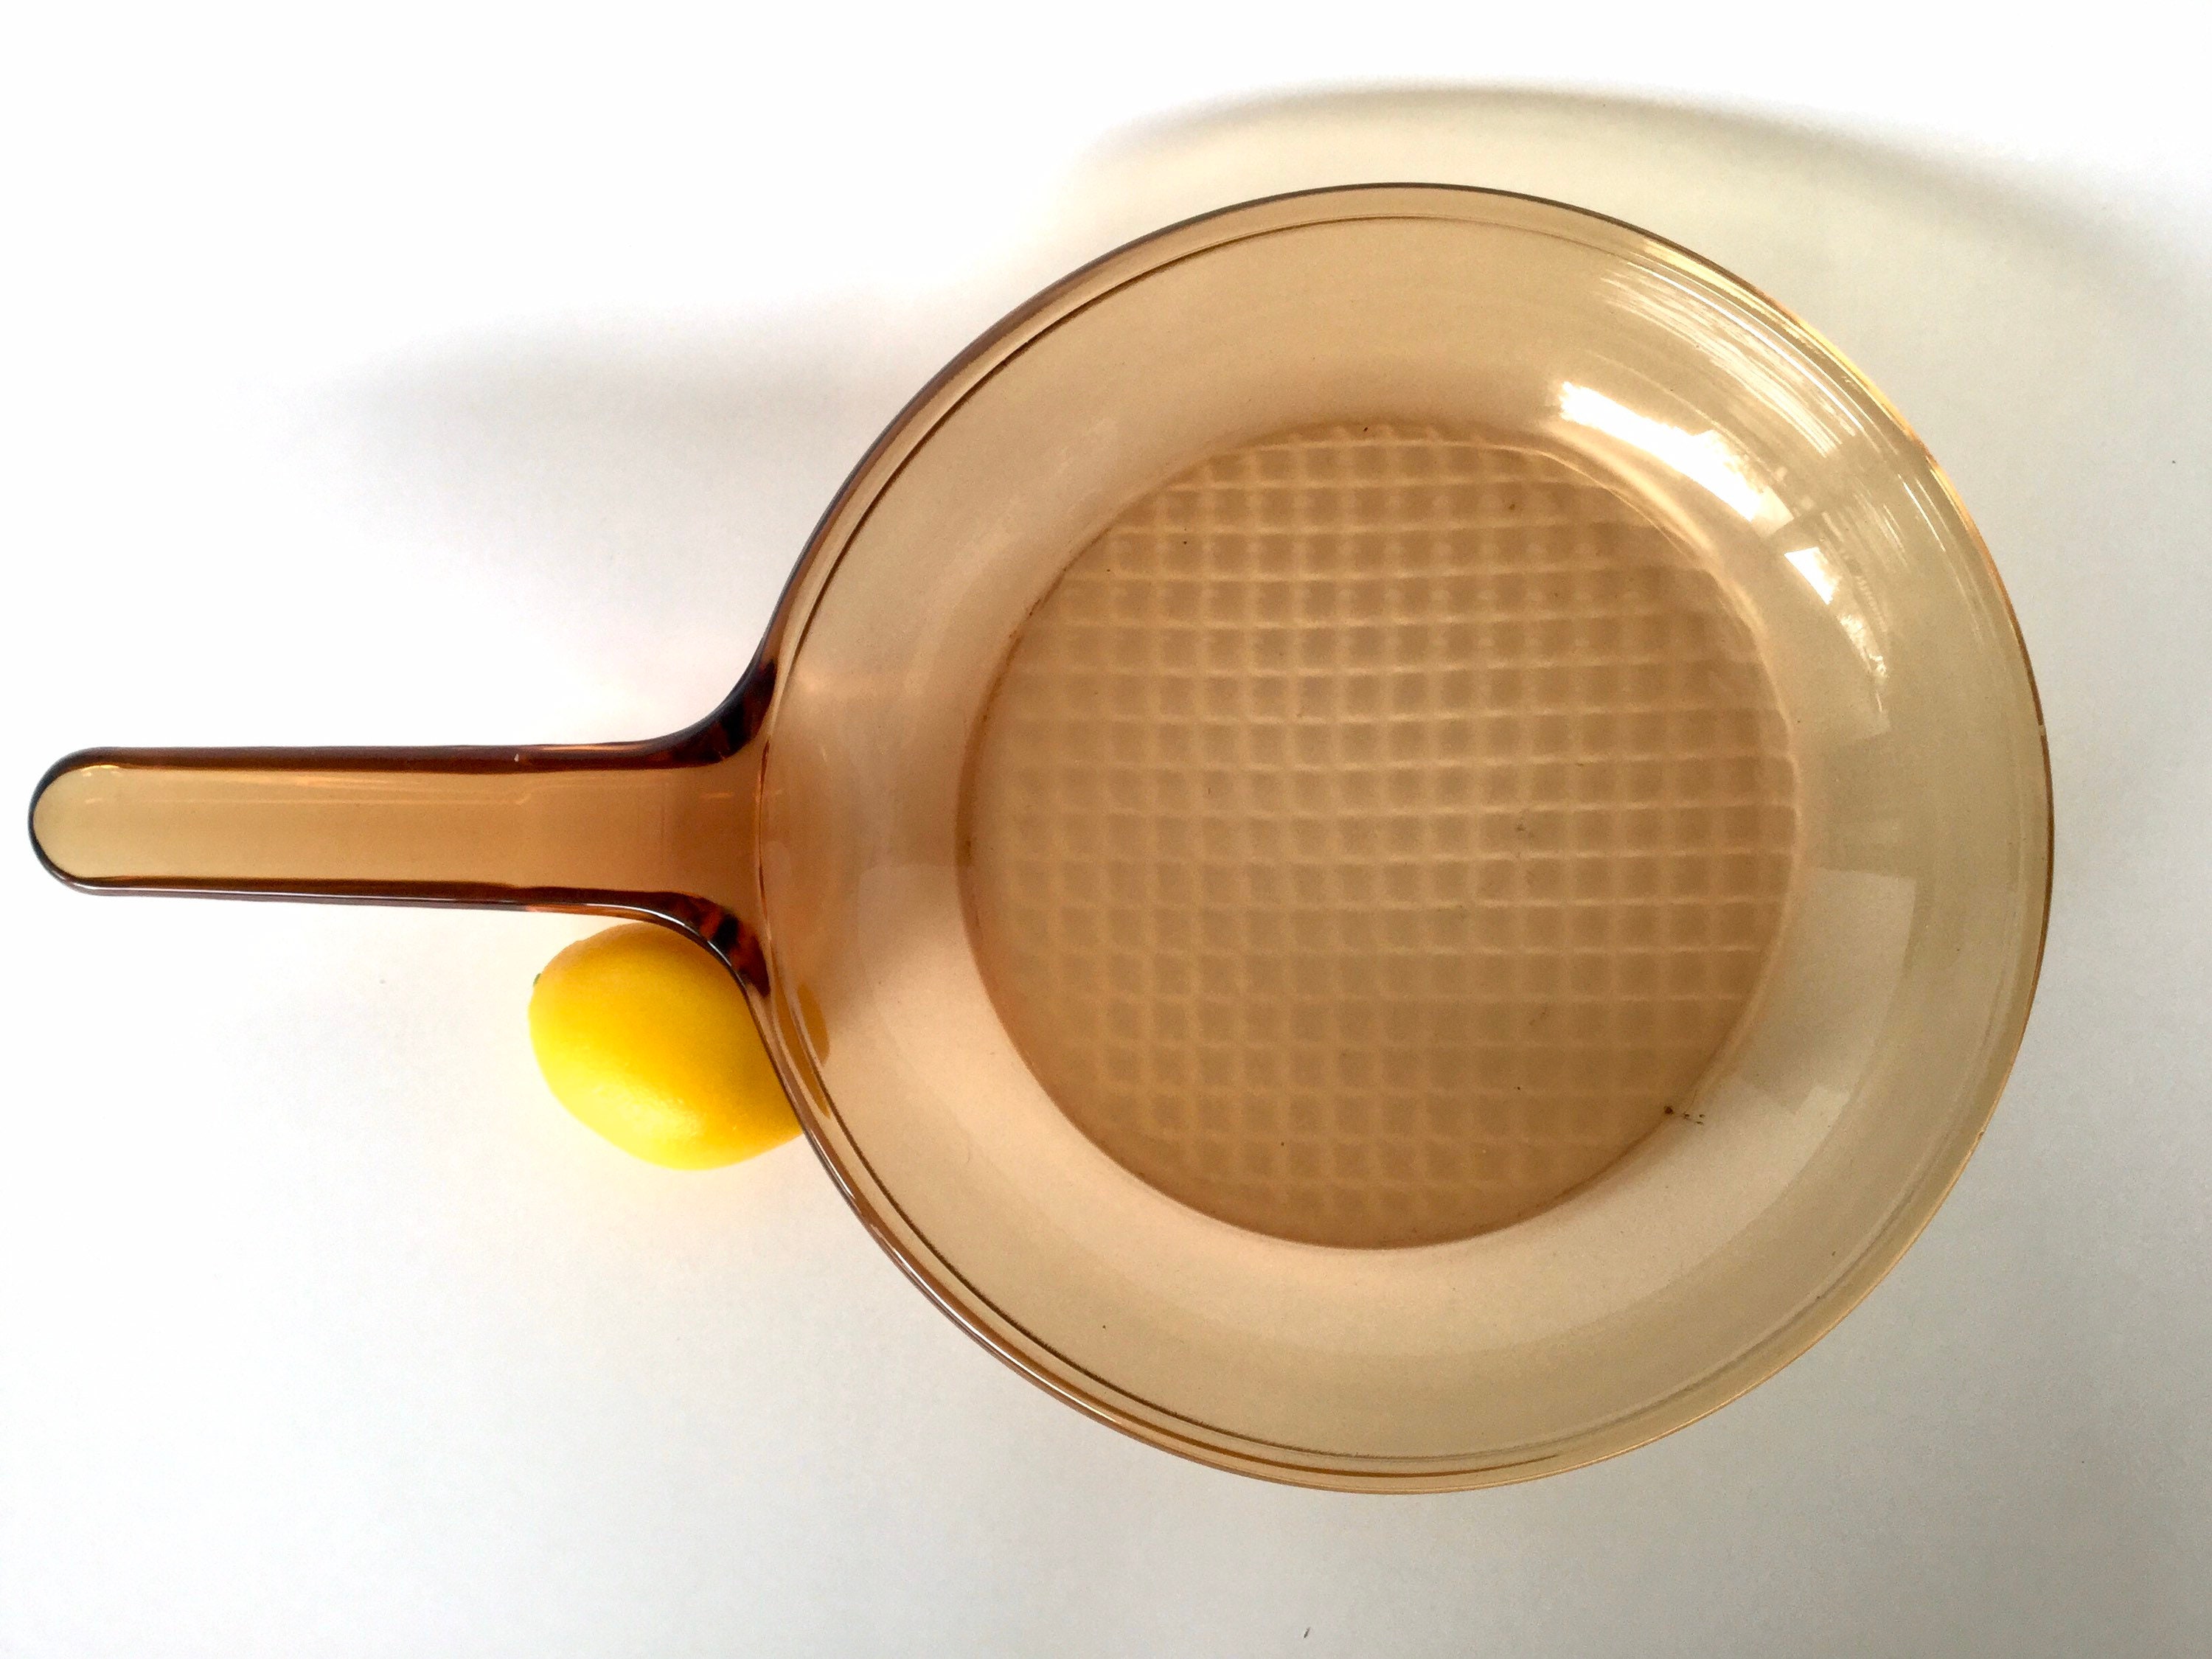 Vintage Visions Cookware 7 Inch Small Frying Pan by Corning -  Sweden